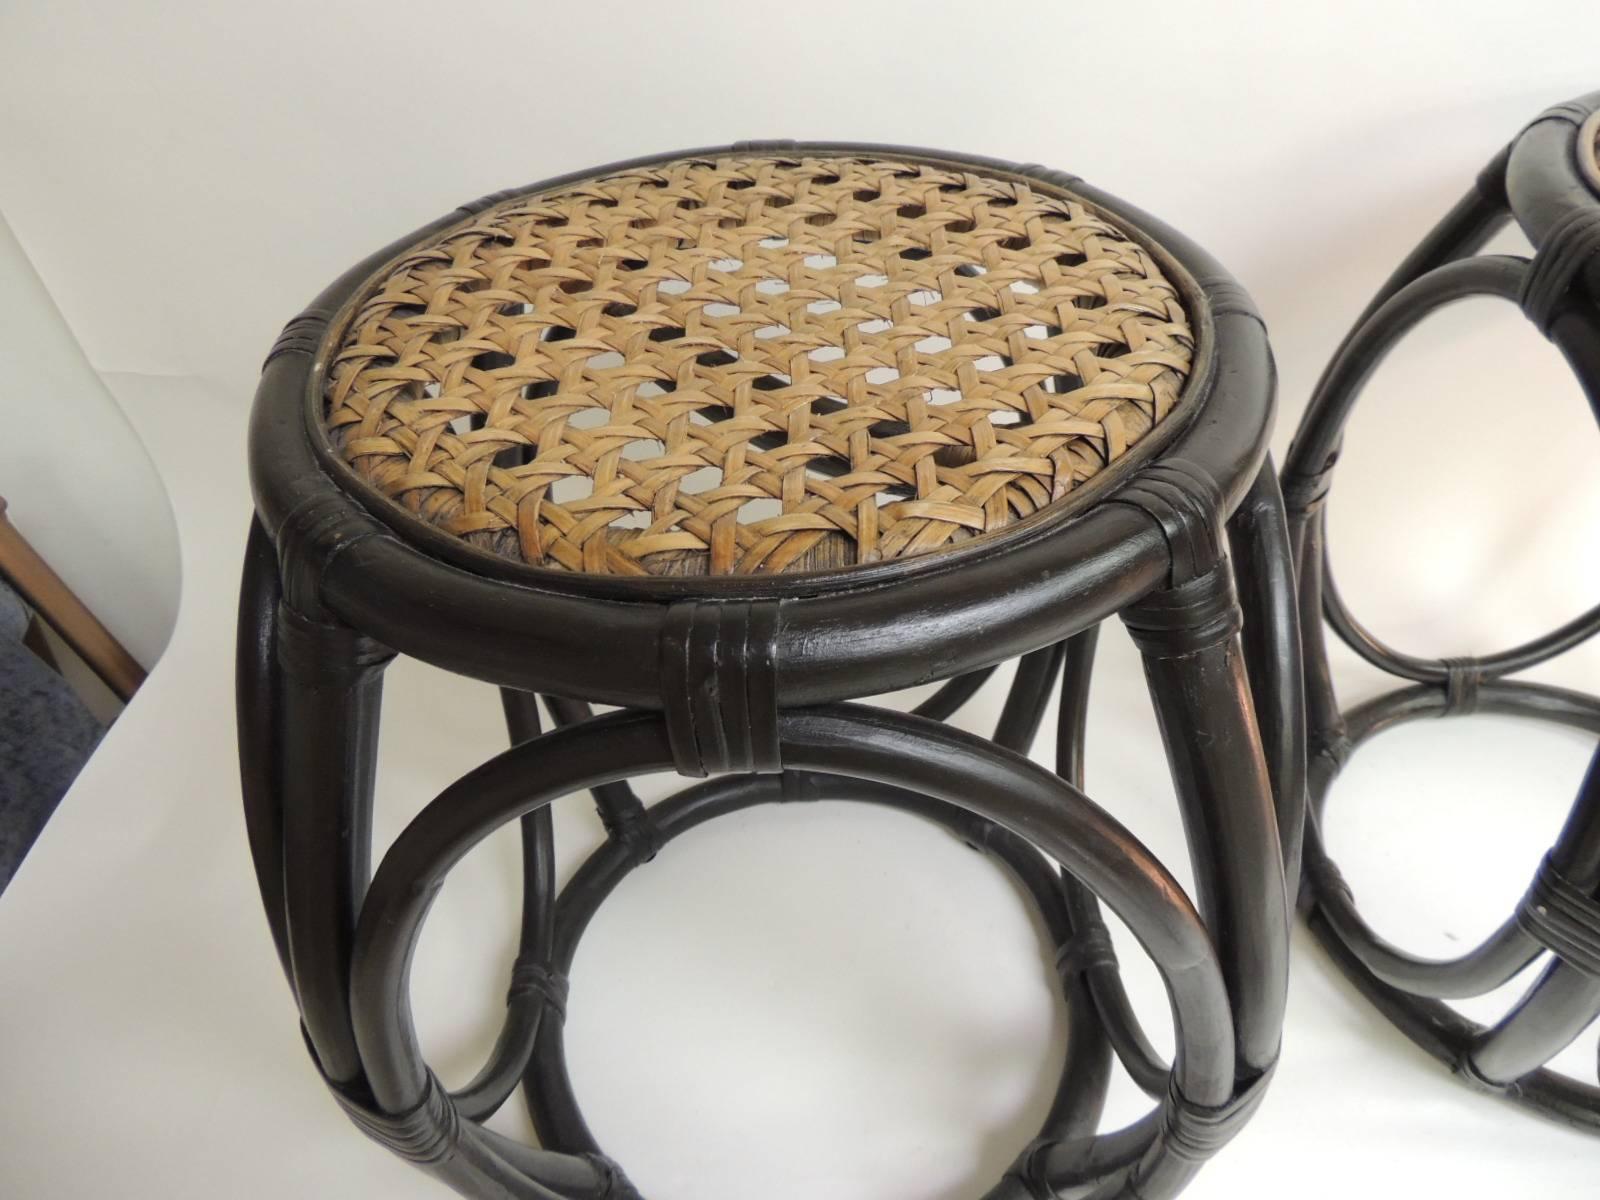 French HOLIDAY SALE: Pair of Vintage Bentwood Thonet Style Stools with Wicker Seats